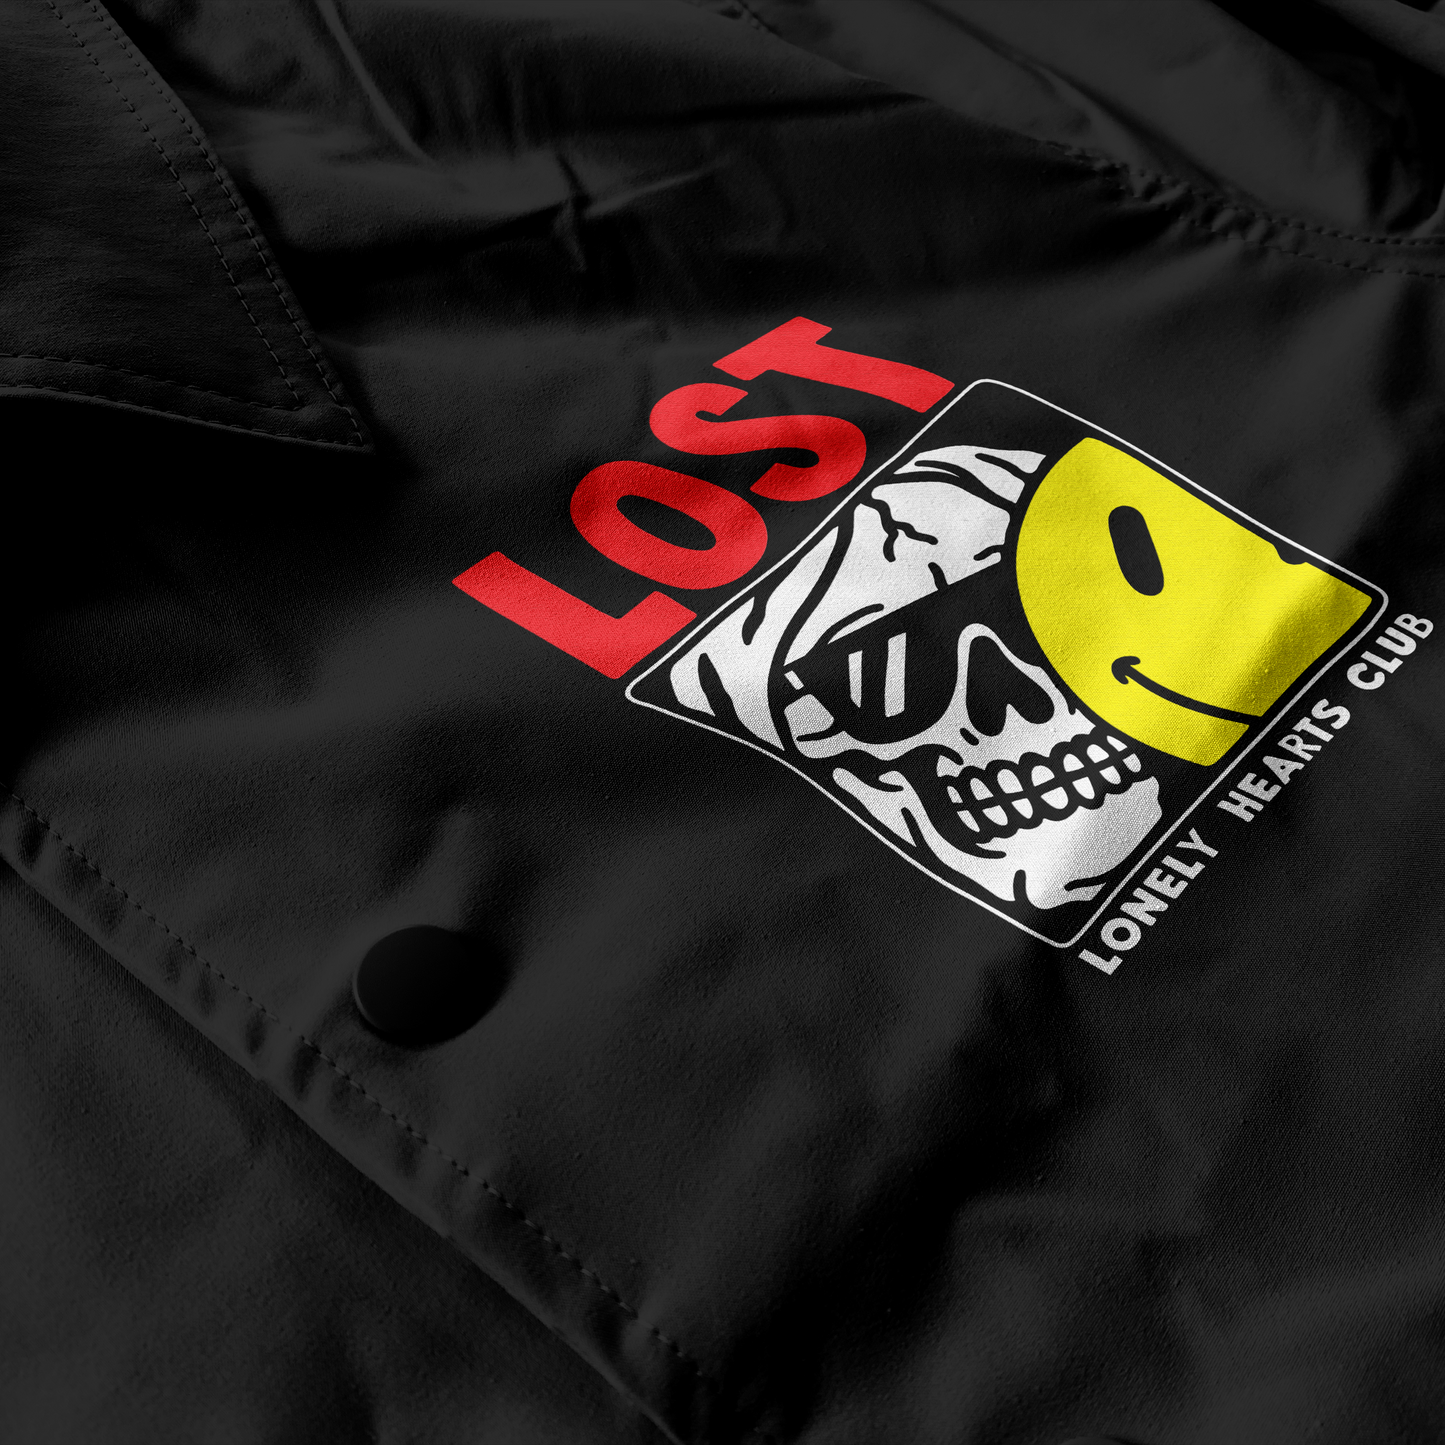 Lost Happiness Coaches Jacket